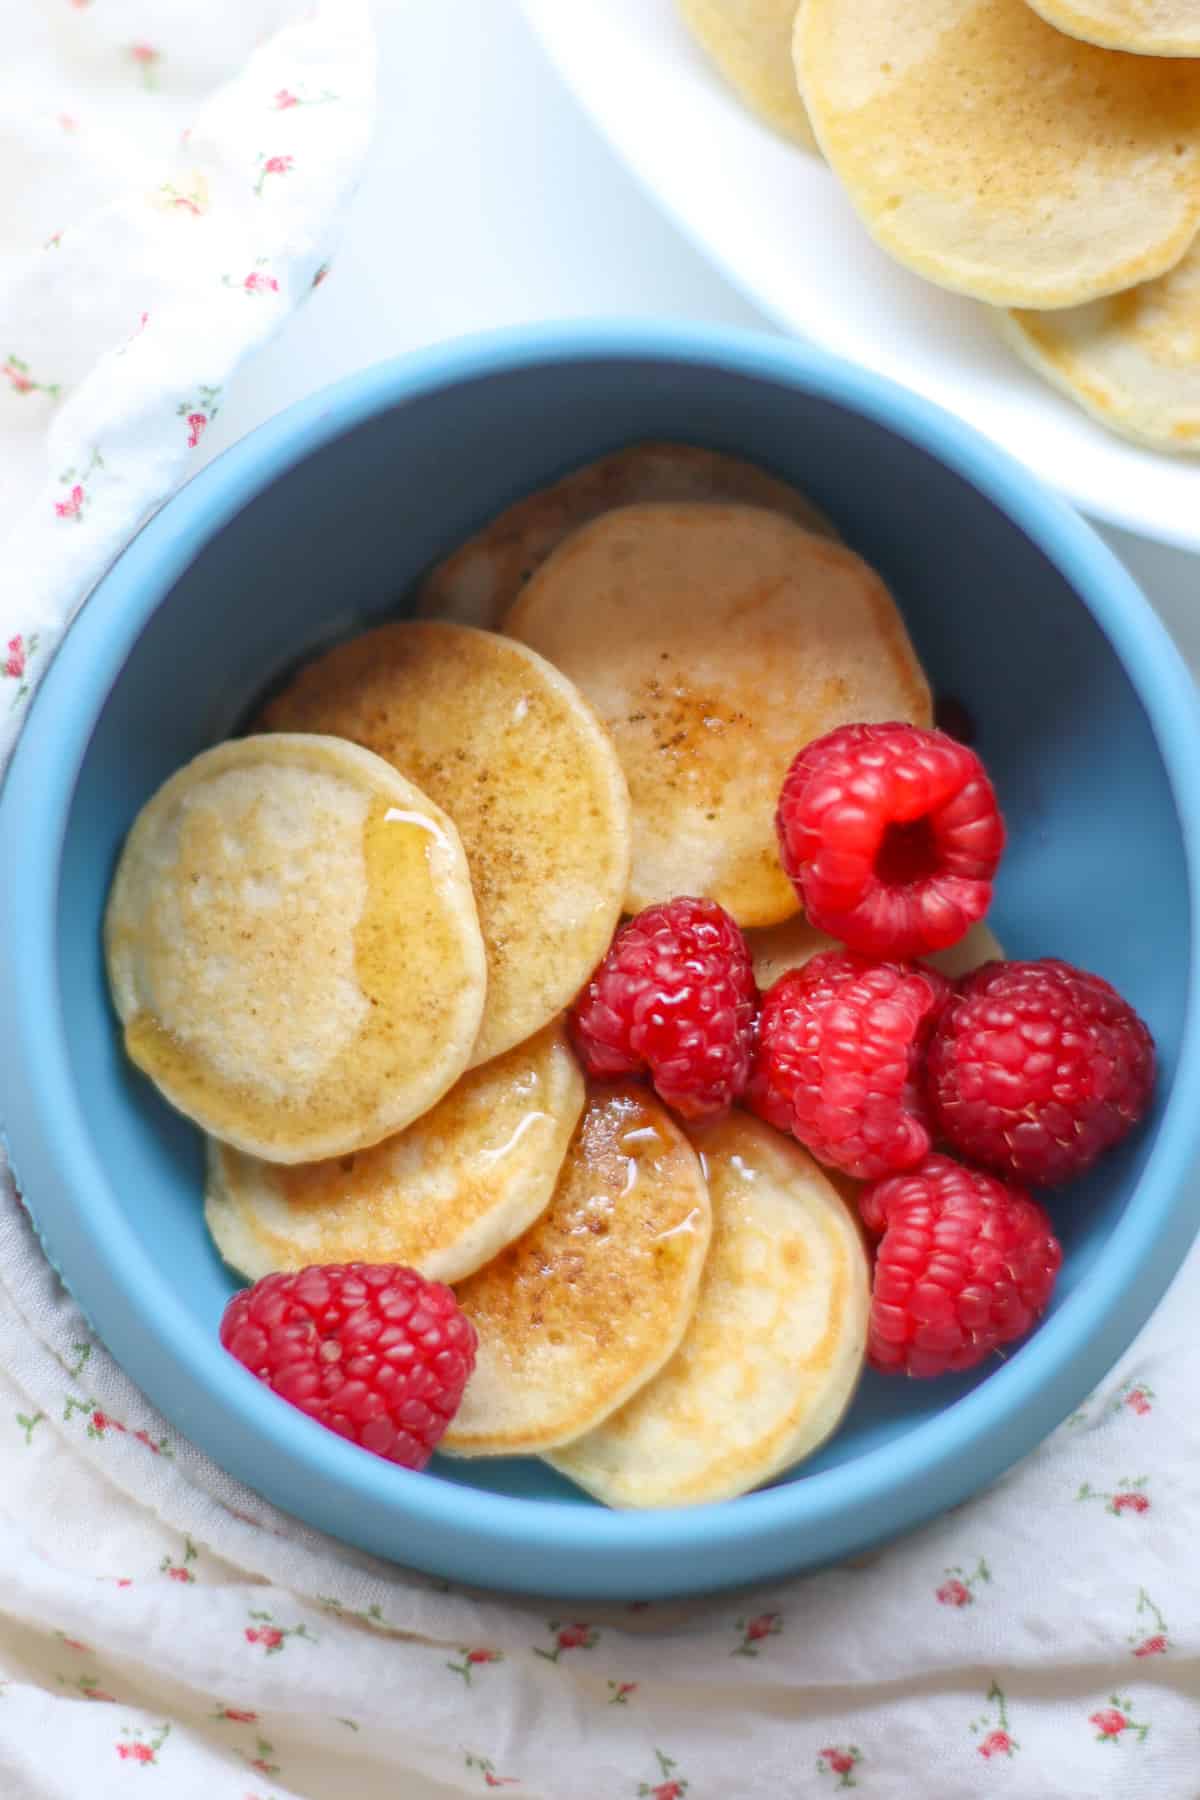 Six pancakes and raspberries in a blue bowl.